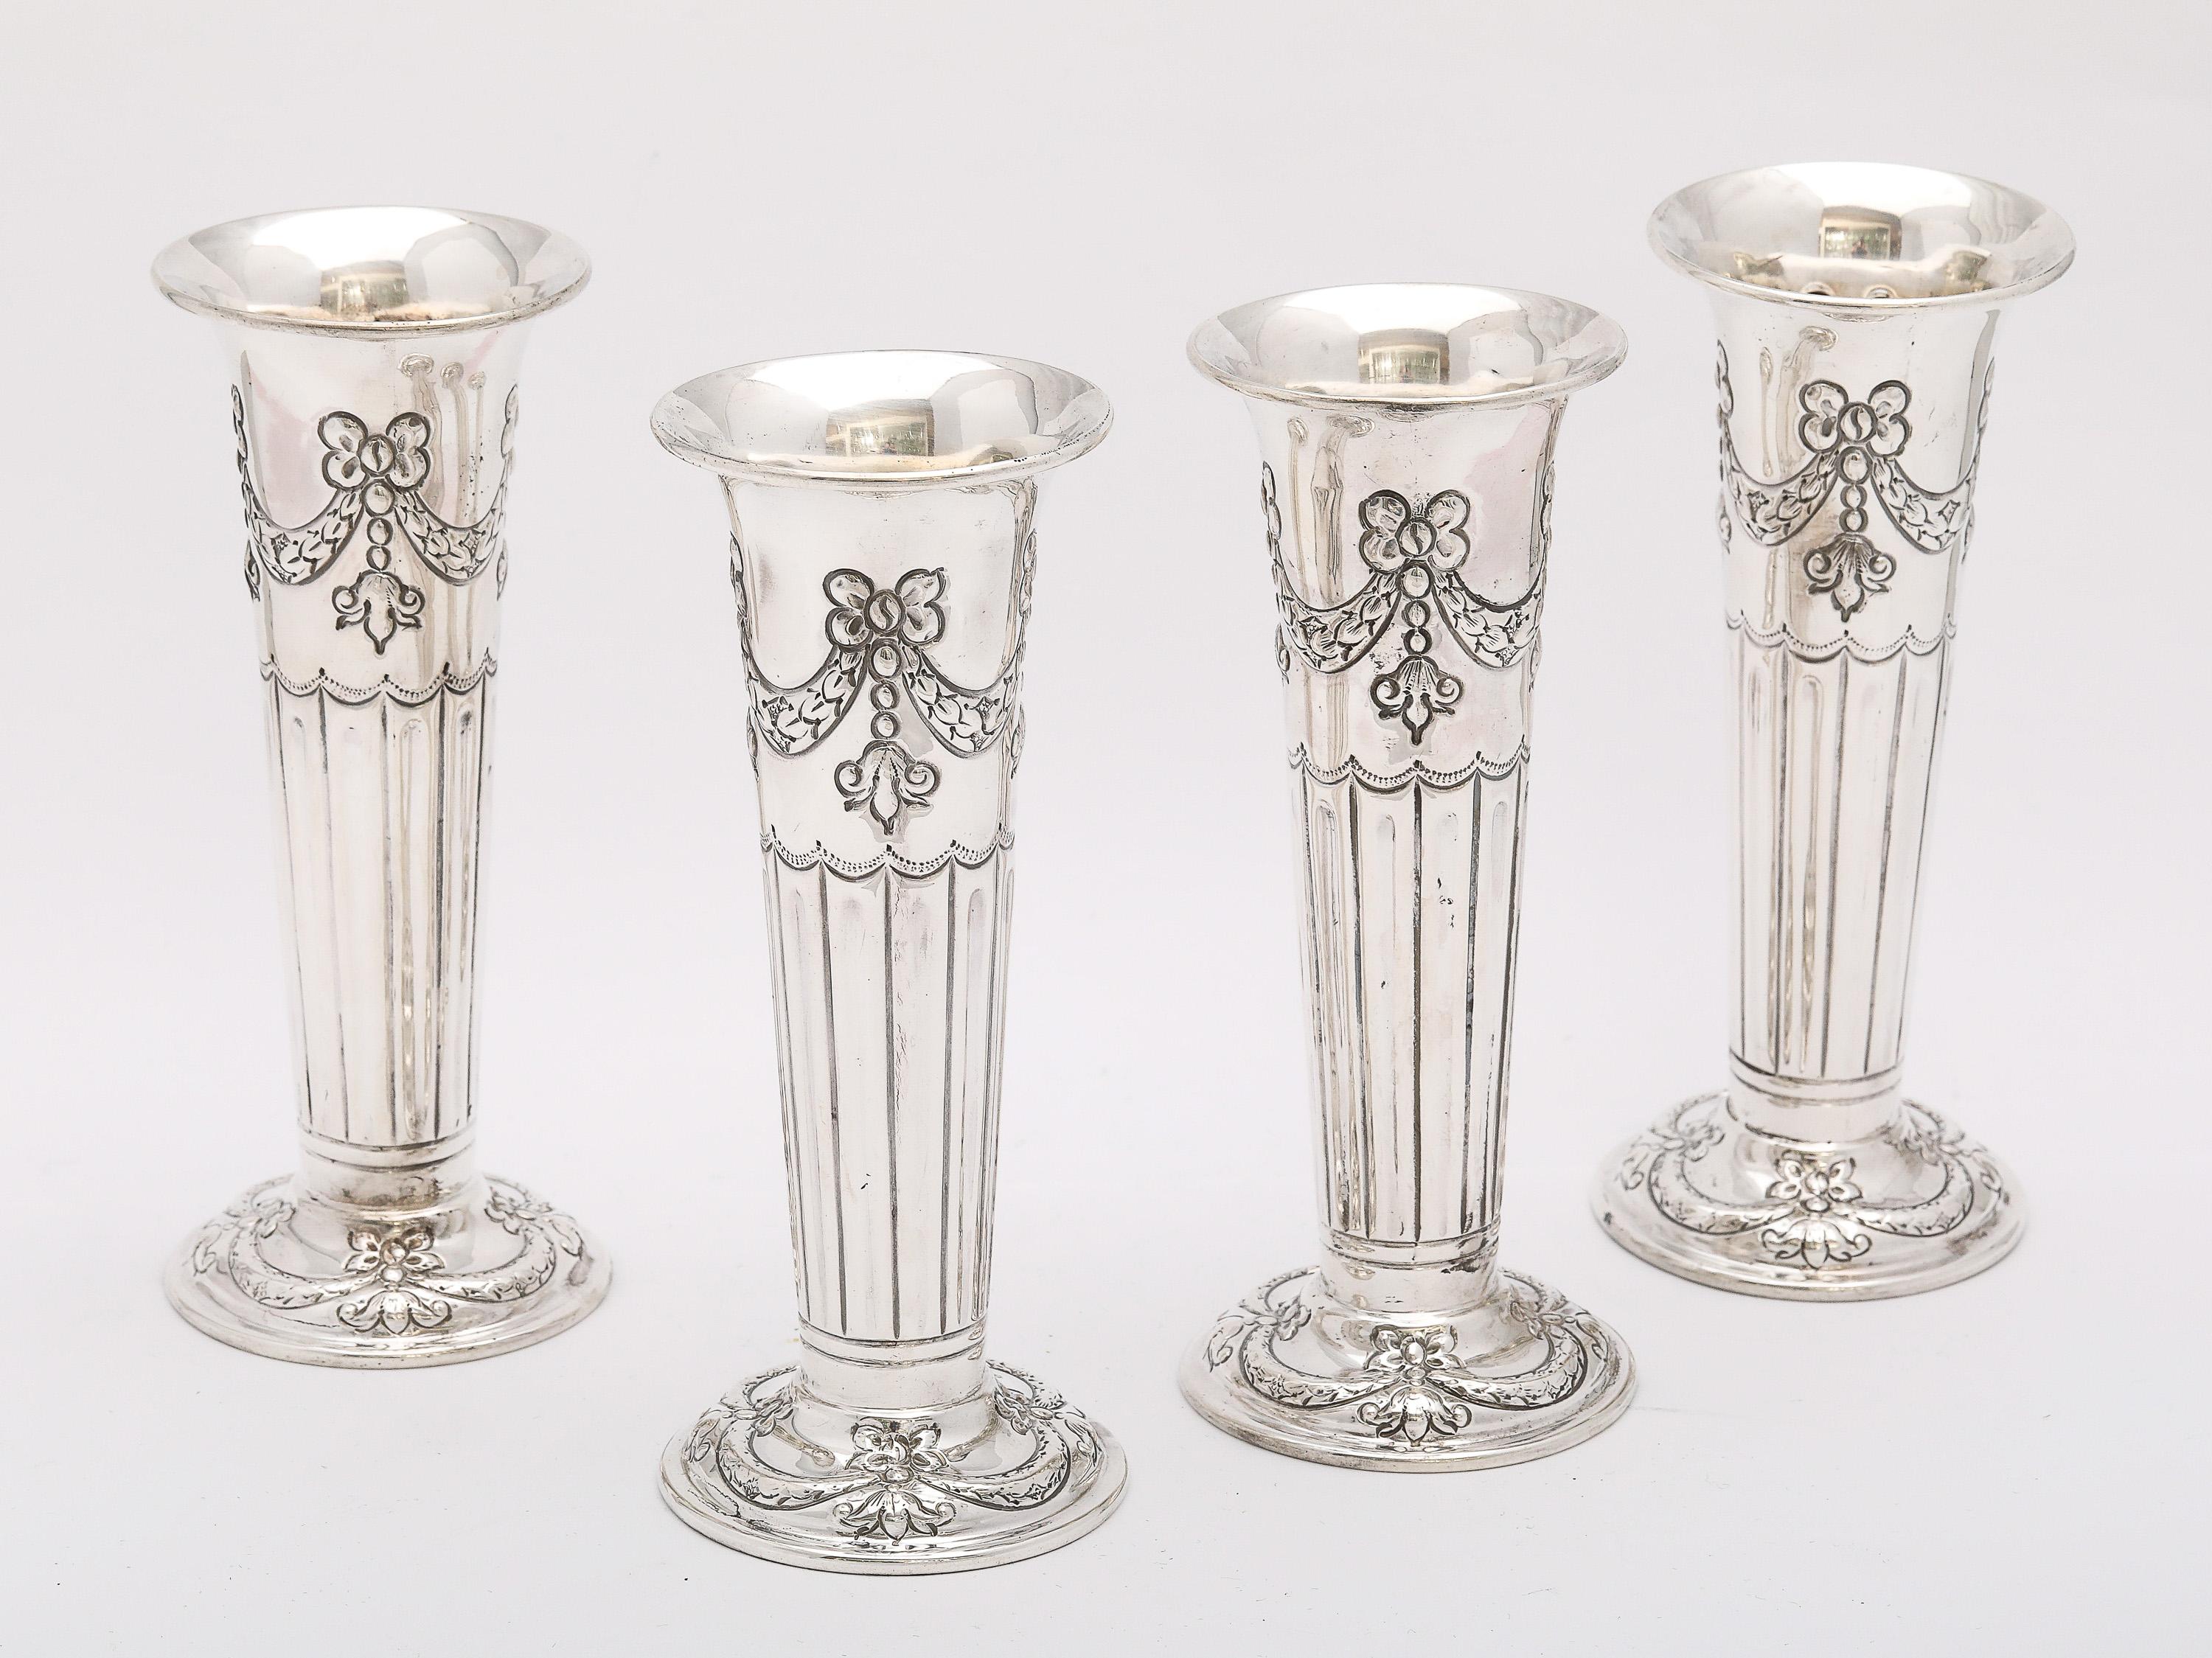 English Rare Victorian Period Set of Four Matching Sterling Silver Bud Vases By Atkin For Sale